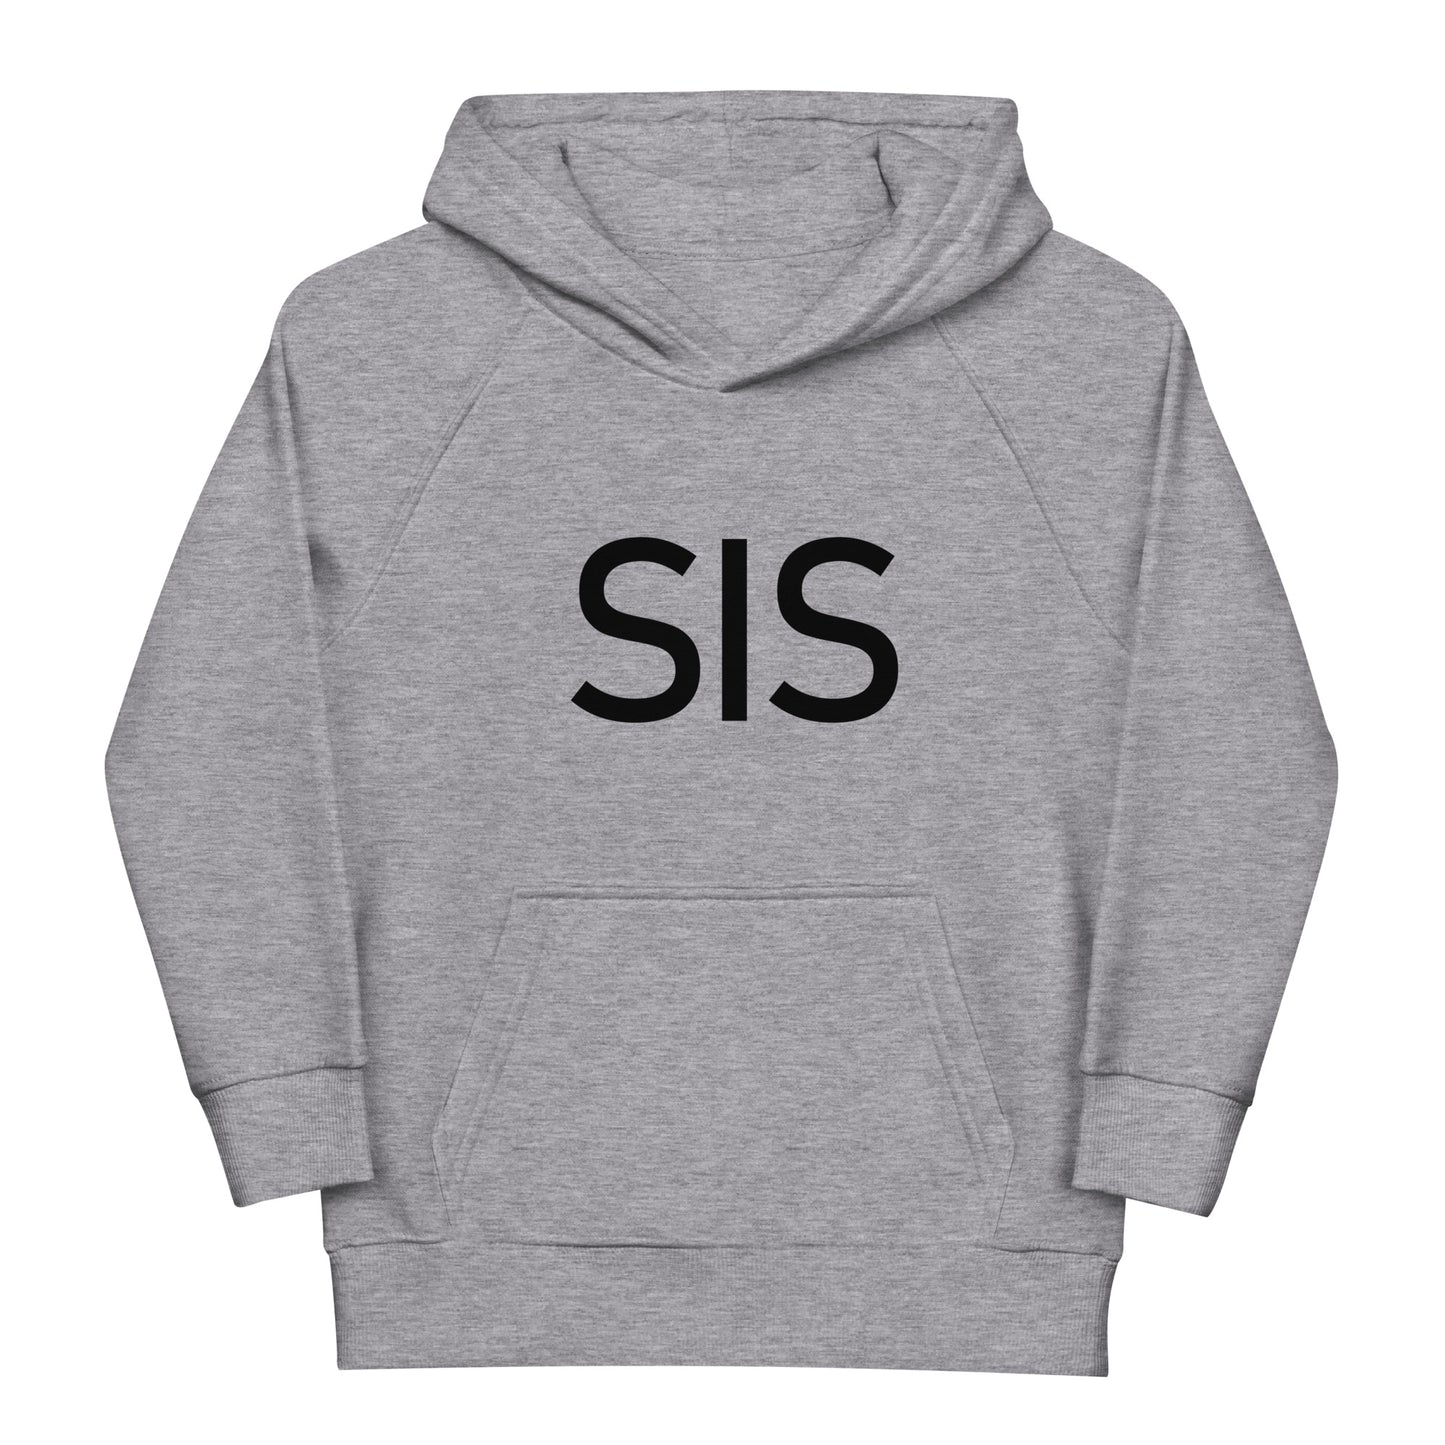 Sis - Sustainably Made Toddler Hoodie